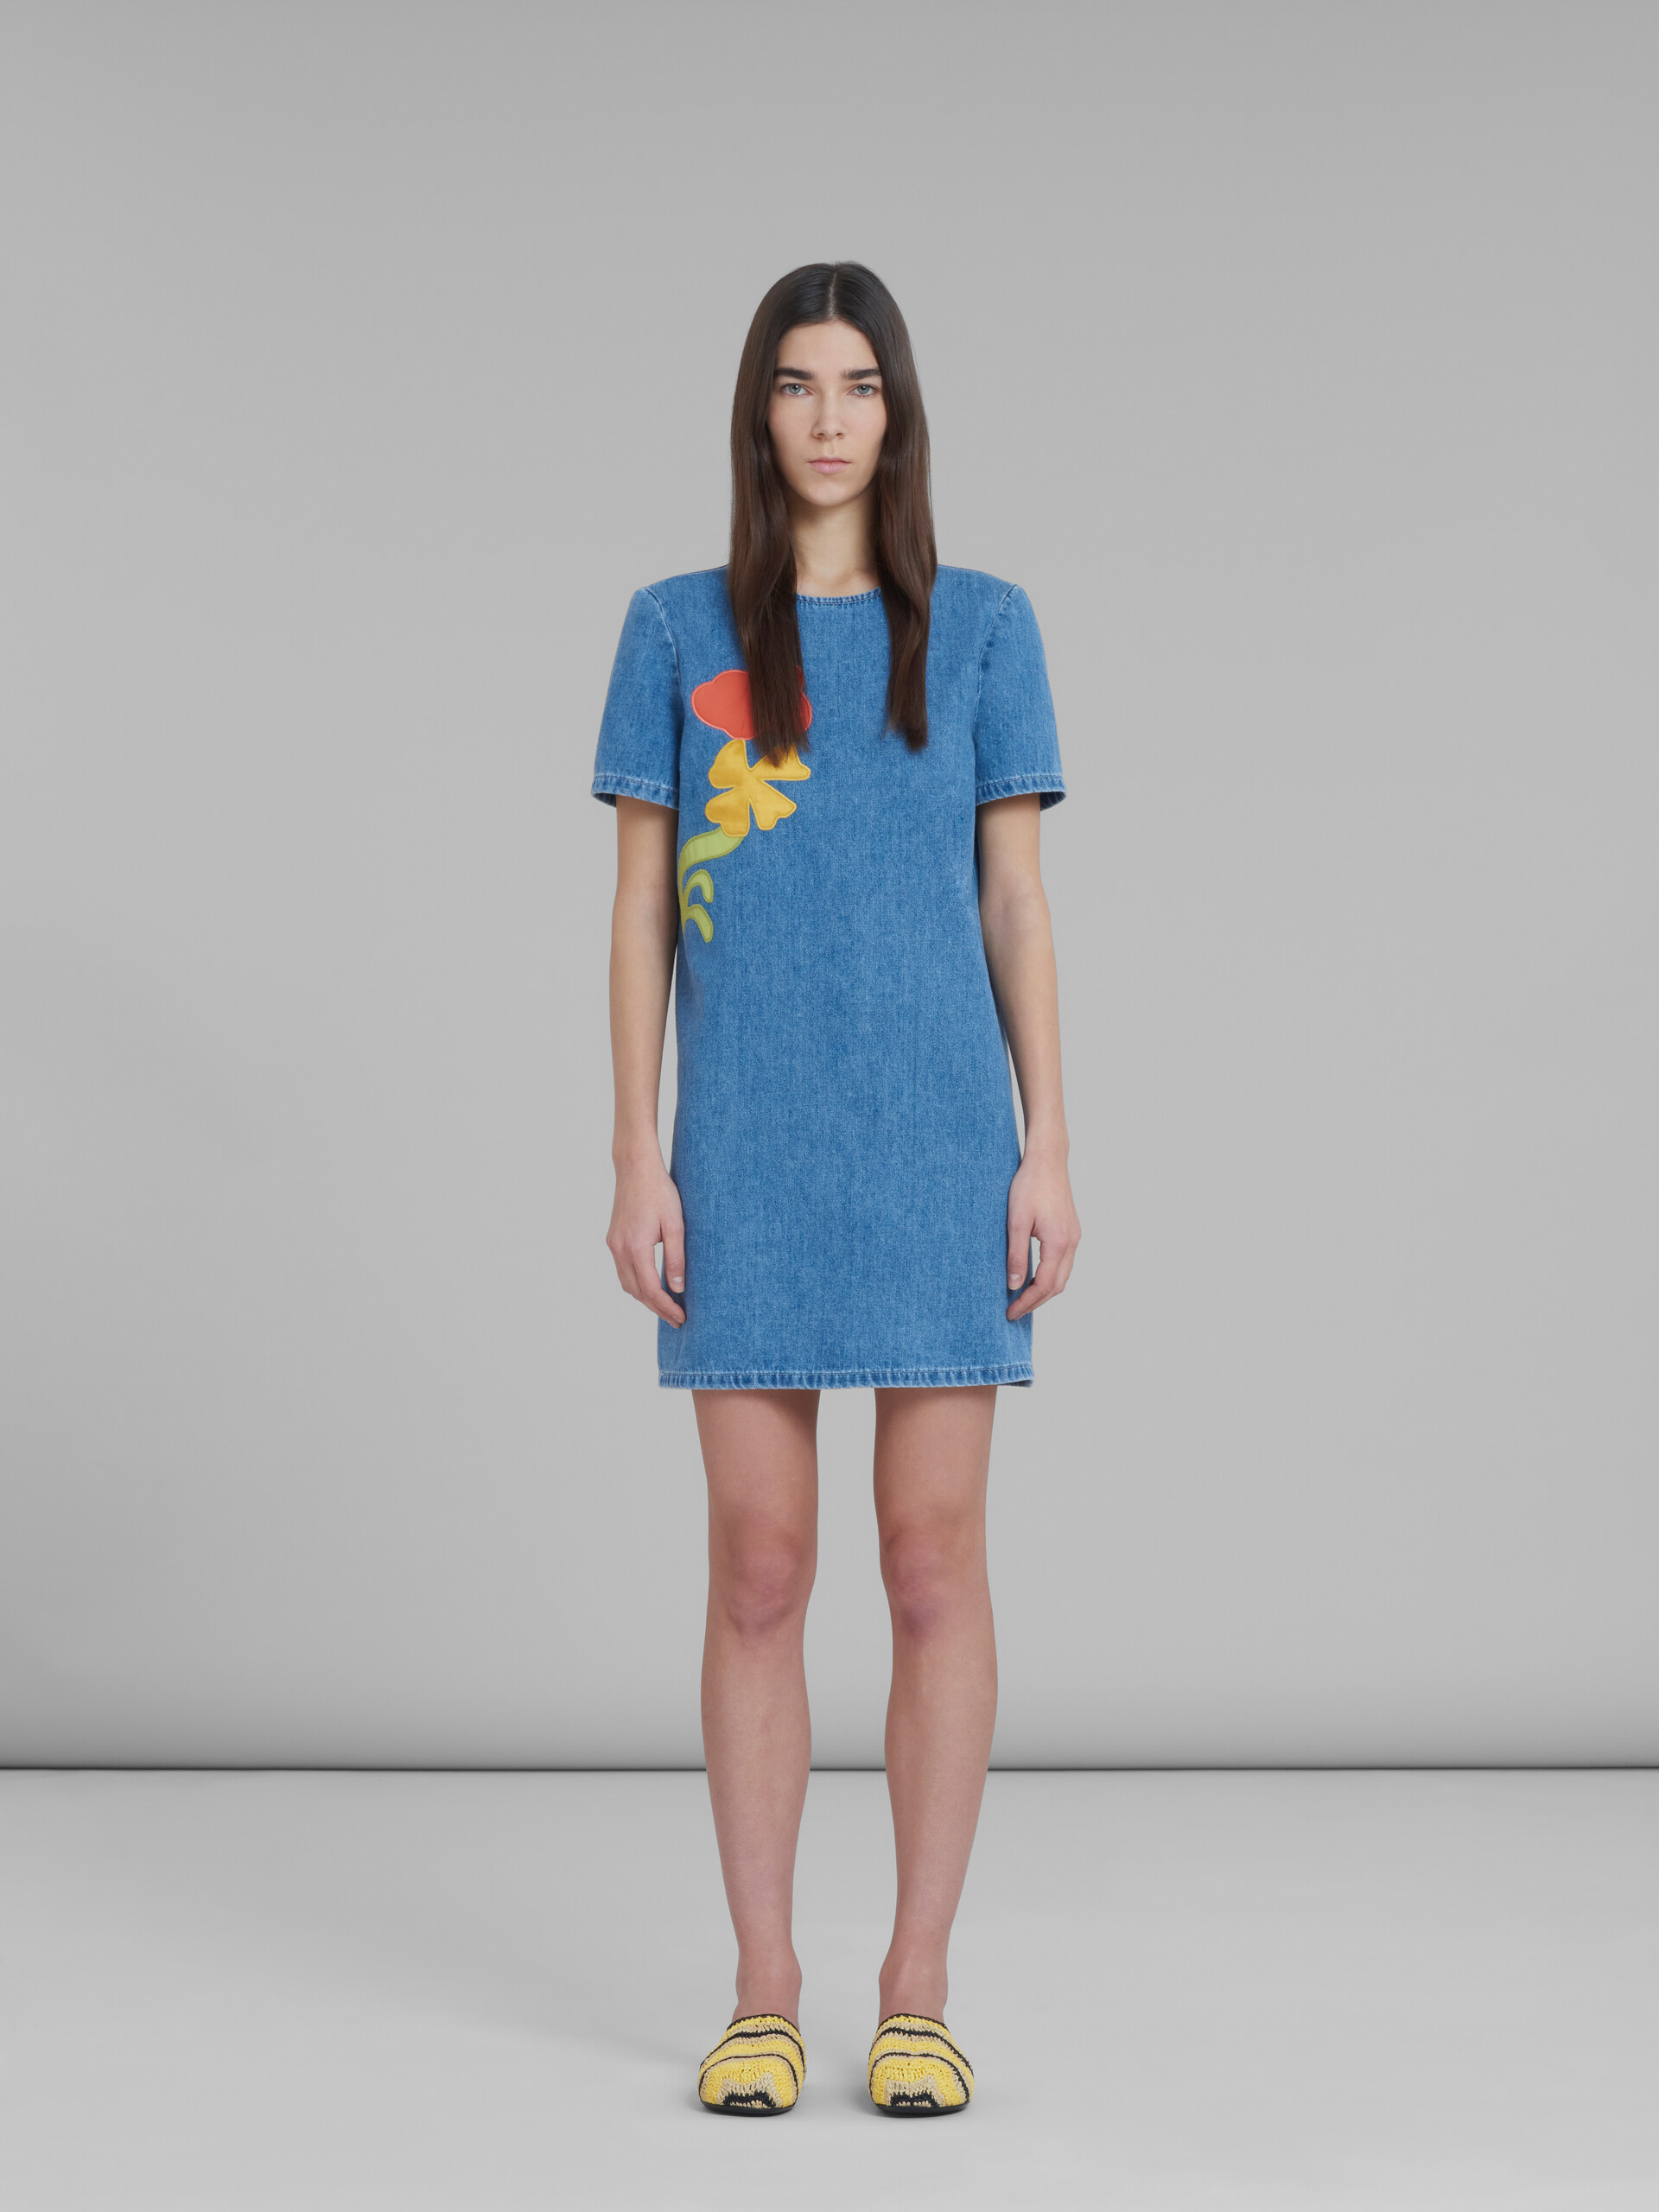 Marni x No Vacancy Inn - Blue chambray short dress with embroidery - Dresses - Image 2